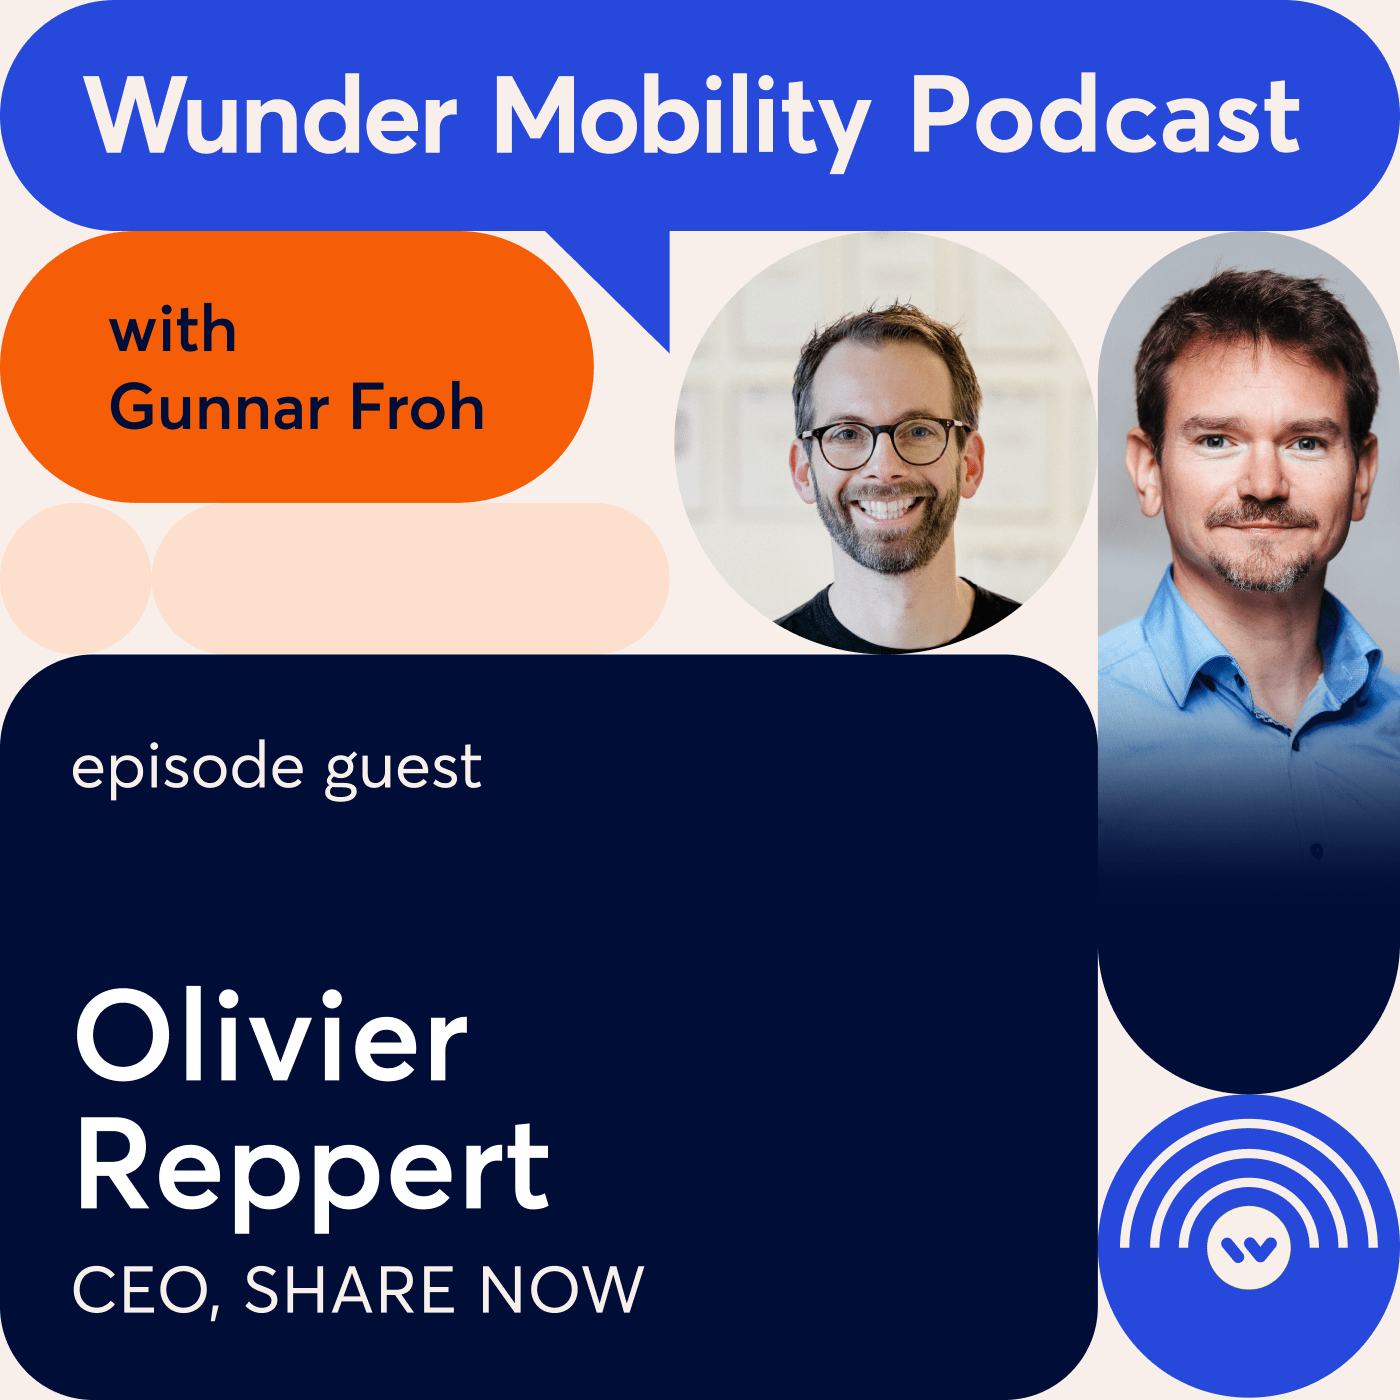 #16 Olivier Reppert, CEO, Share Now